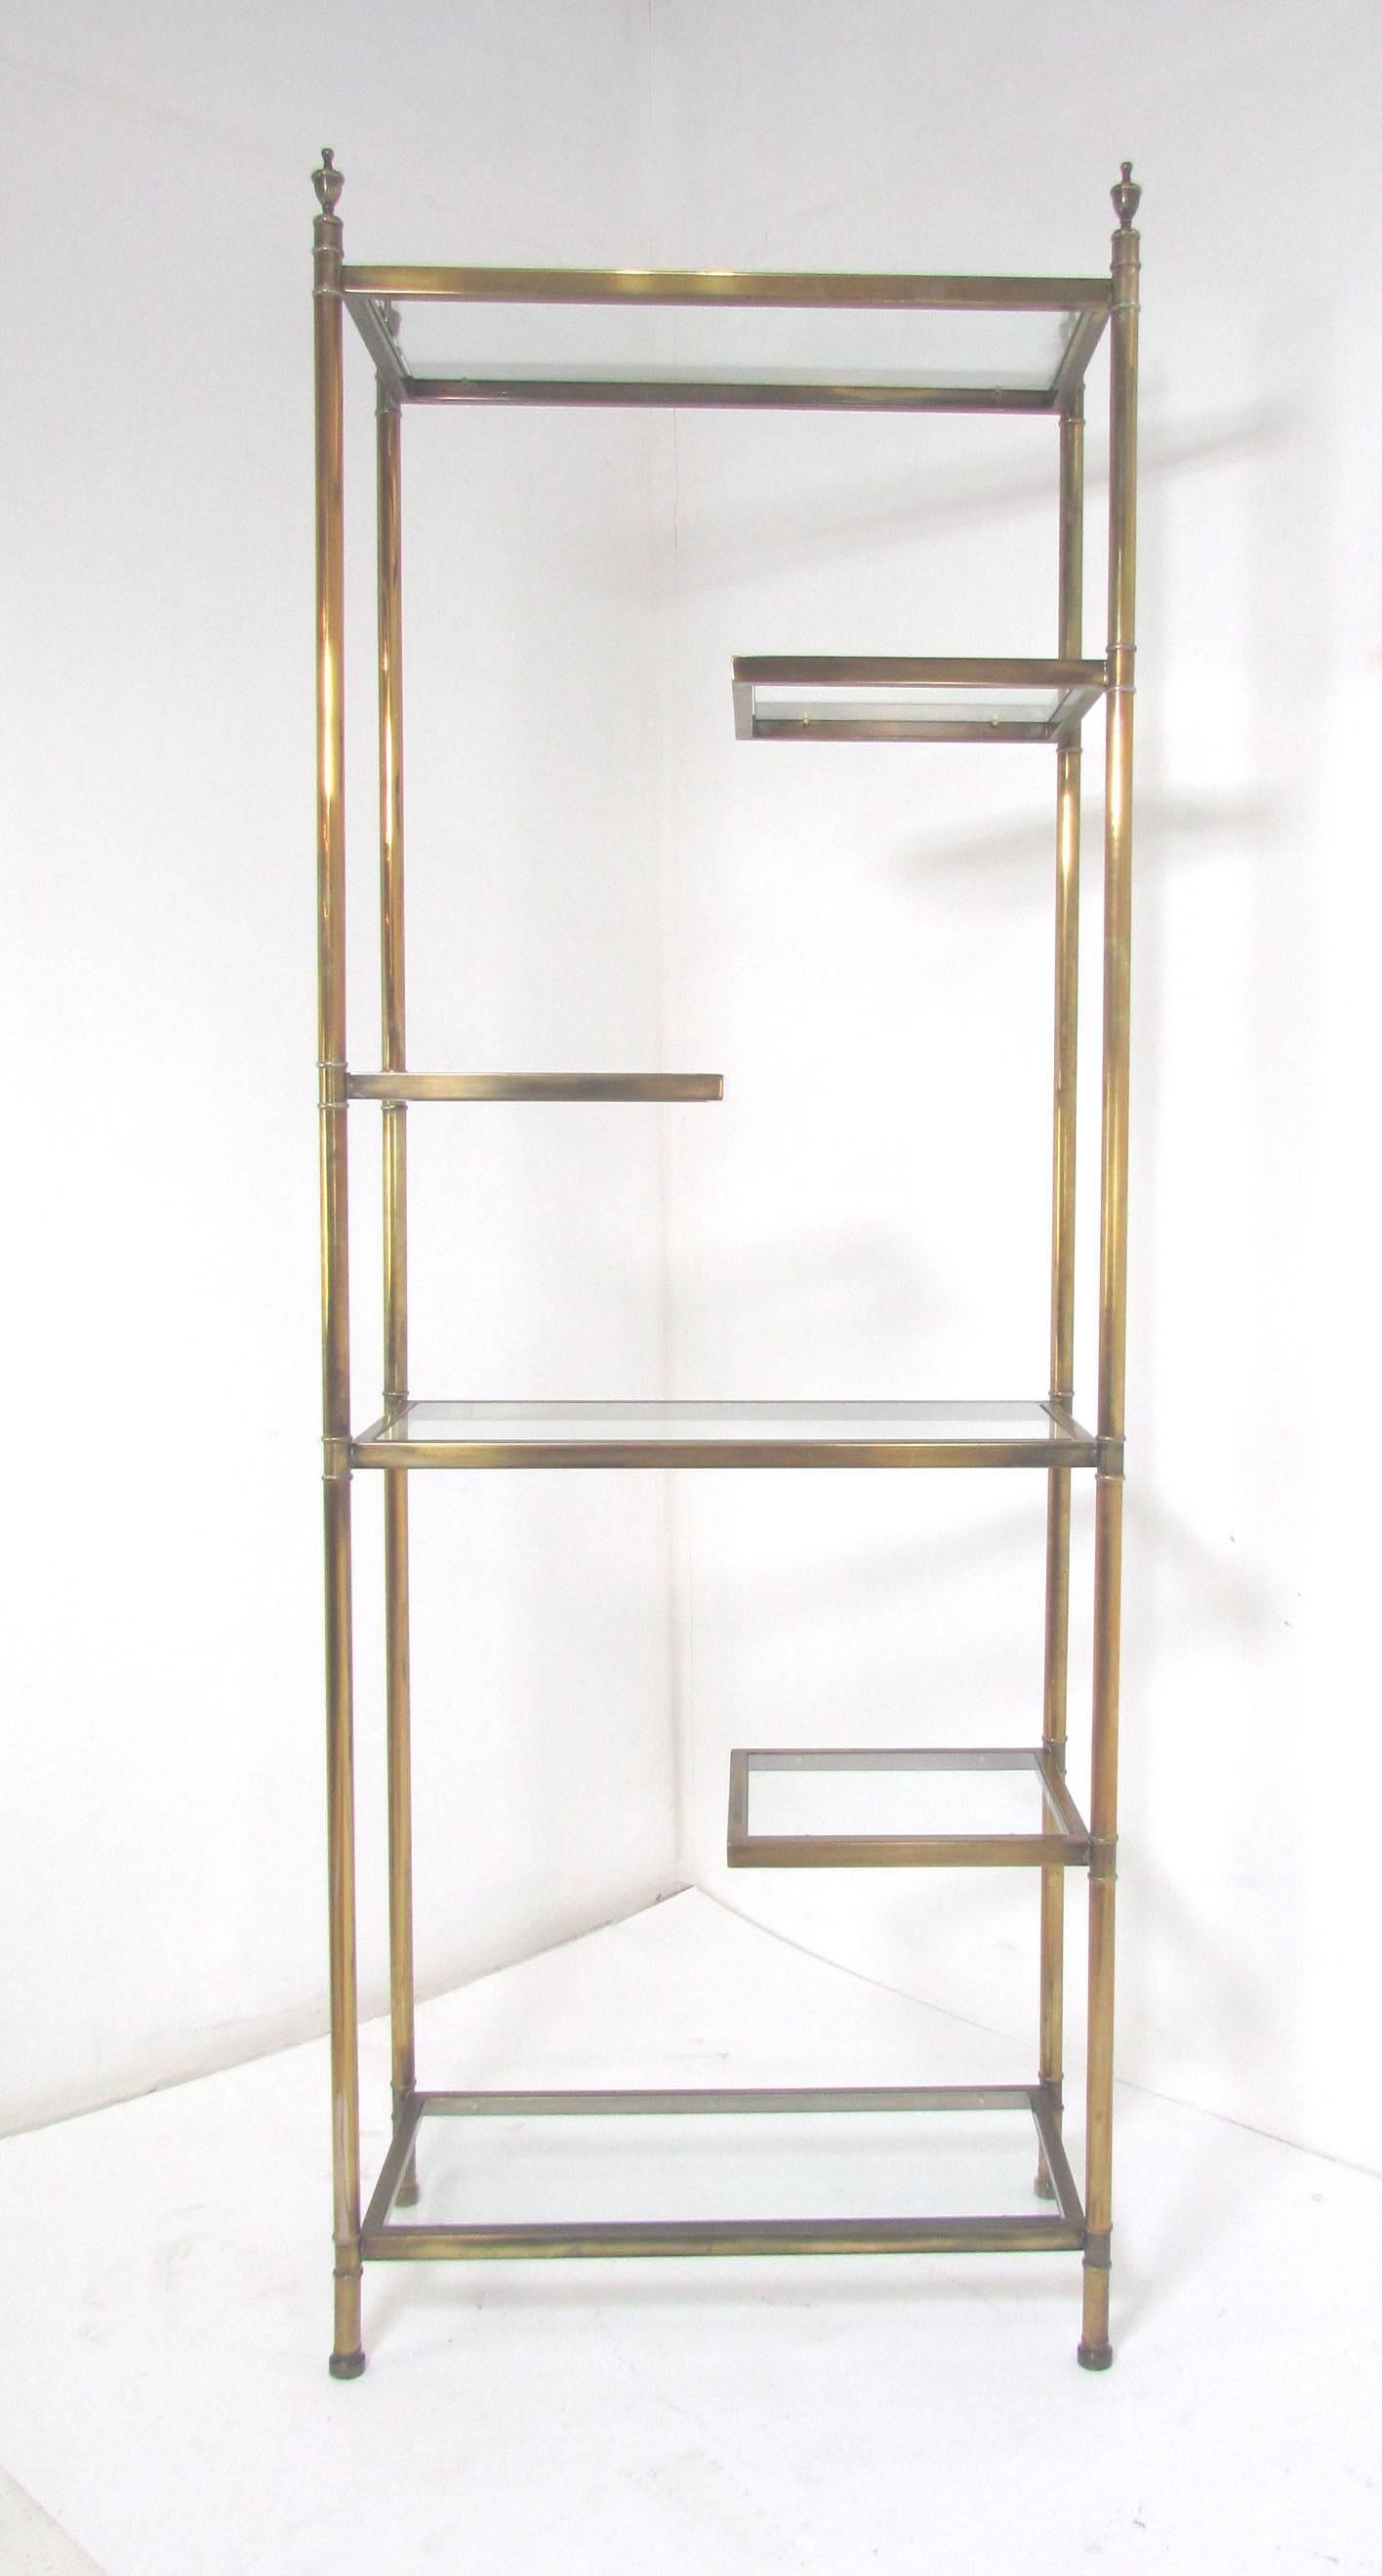 Elegant étagère in brass with glass shelves, with unusual stepped cantilevered shelf design, circa 1950s. Unmarked, but reminiscent of Mastercraft or Maison Jansen designs.